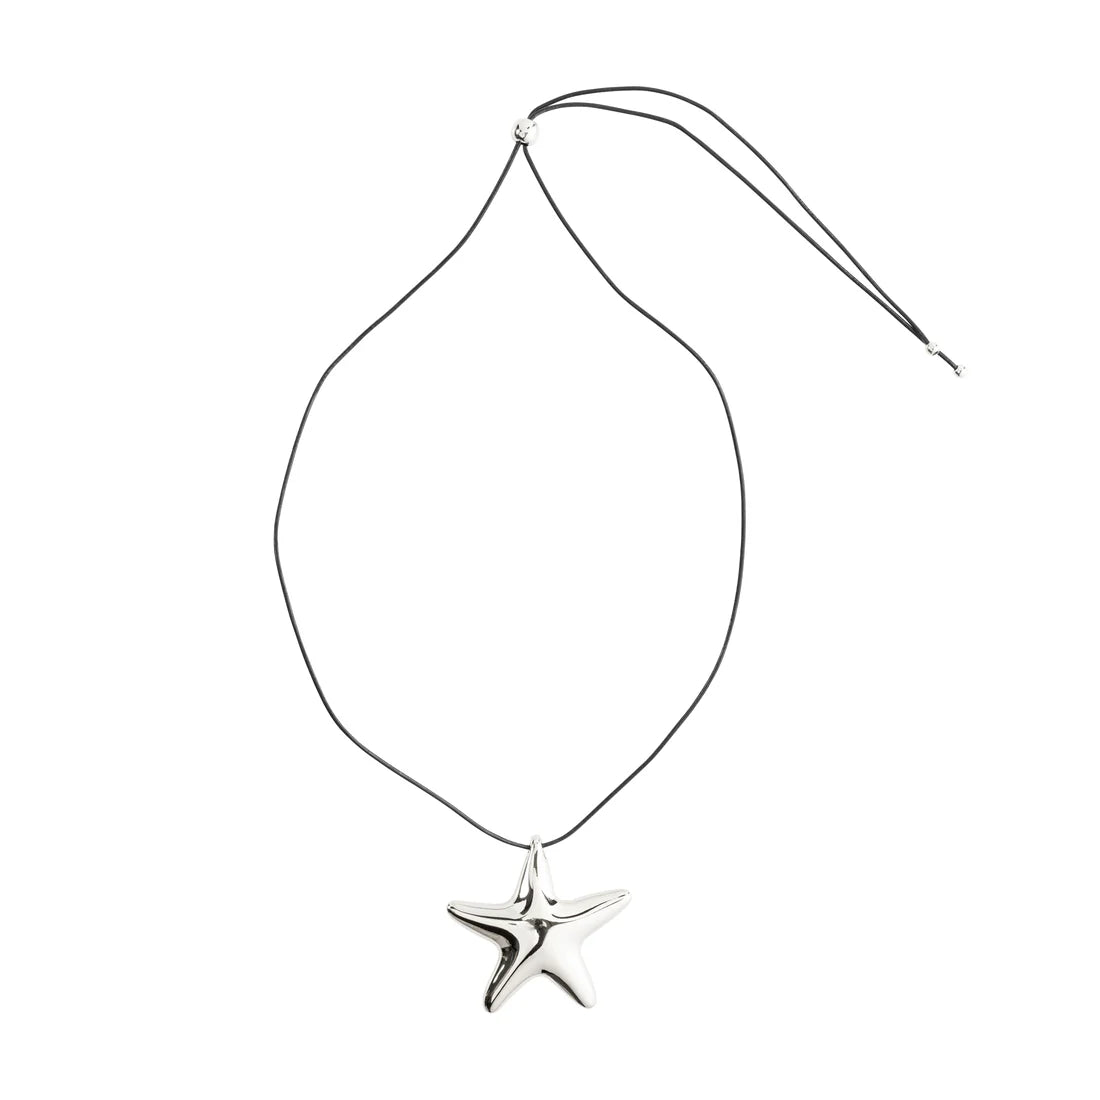 Force Necklace - silver